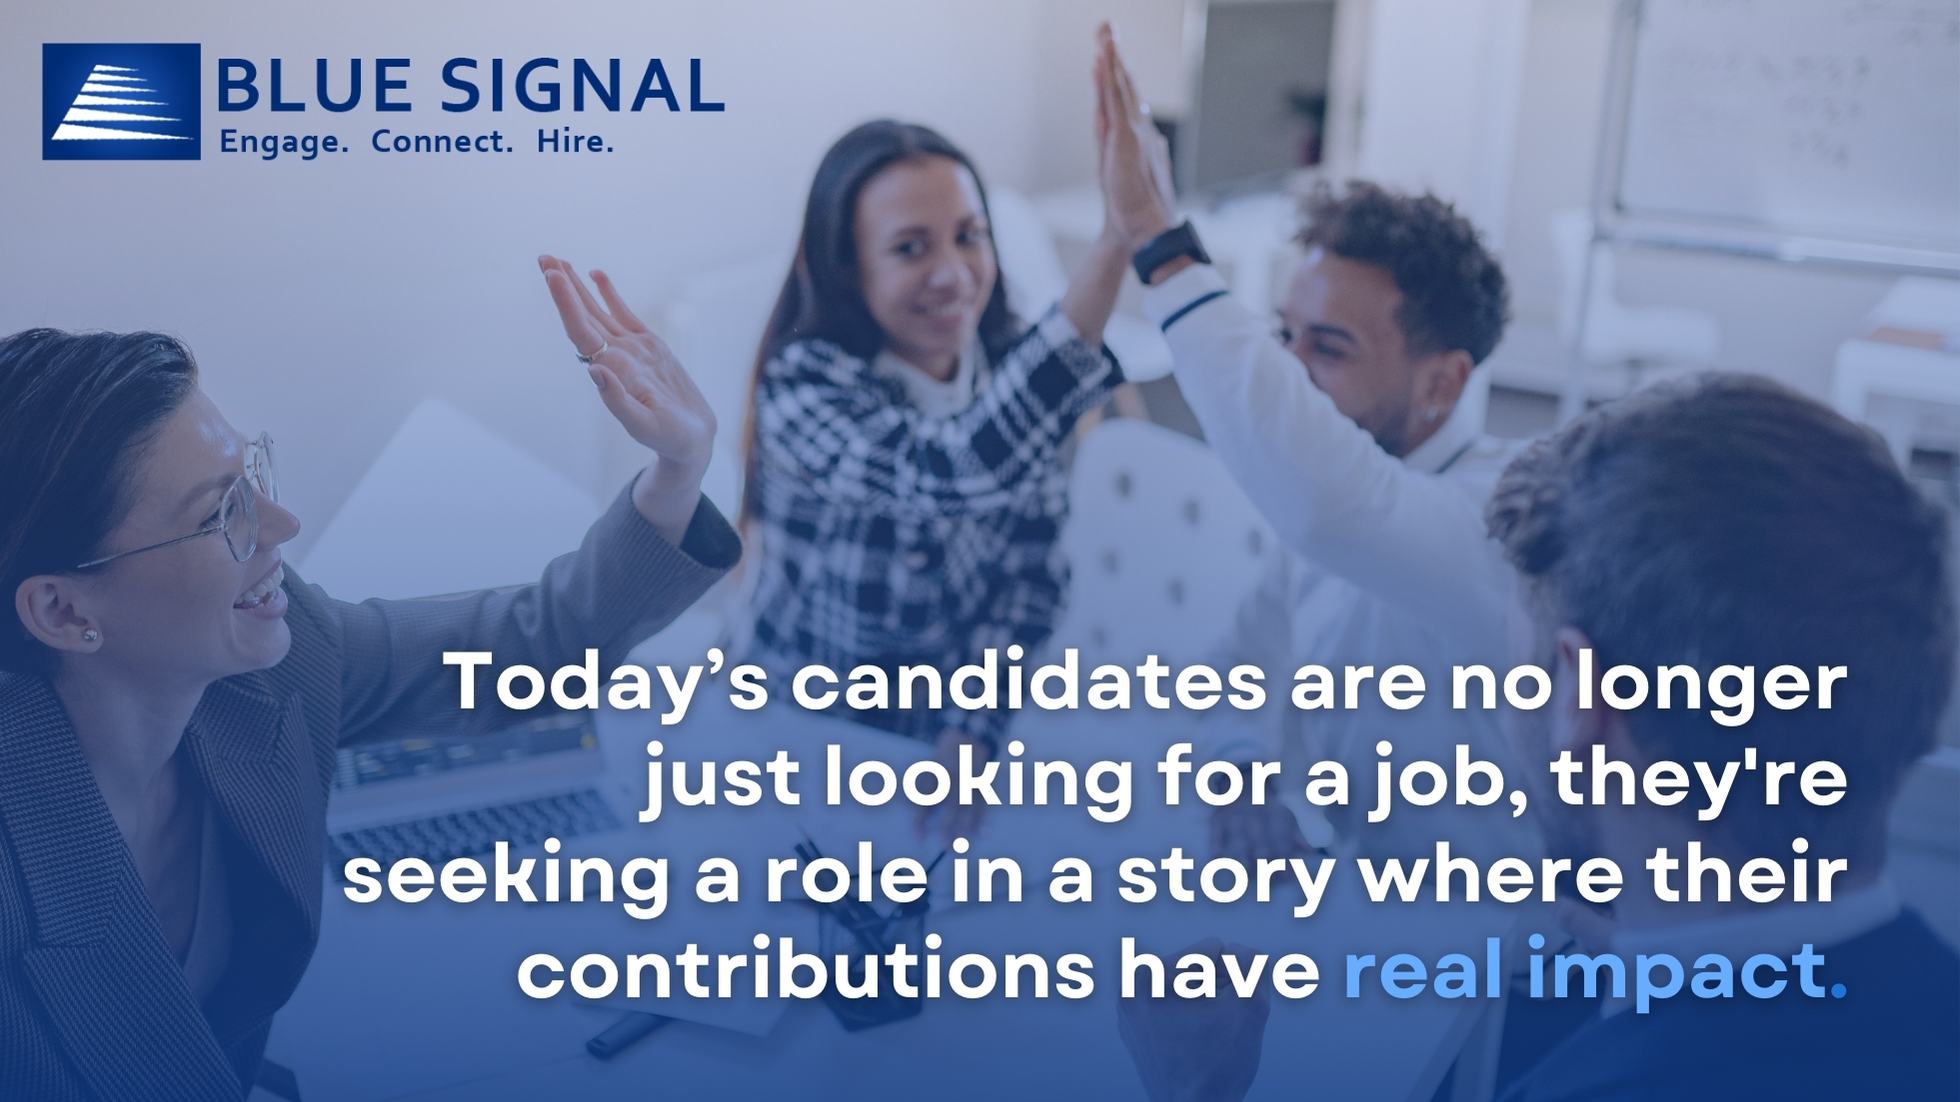 "Enthusiastic team members high-fiving in a collaborative office setting, symbolizing job seekers' desire for impactful roles, aligning with their goal to 'attracting talent'.